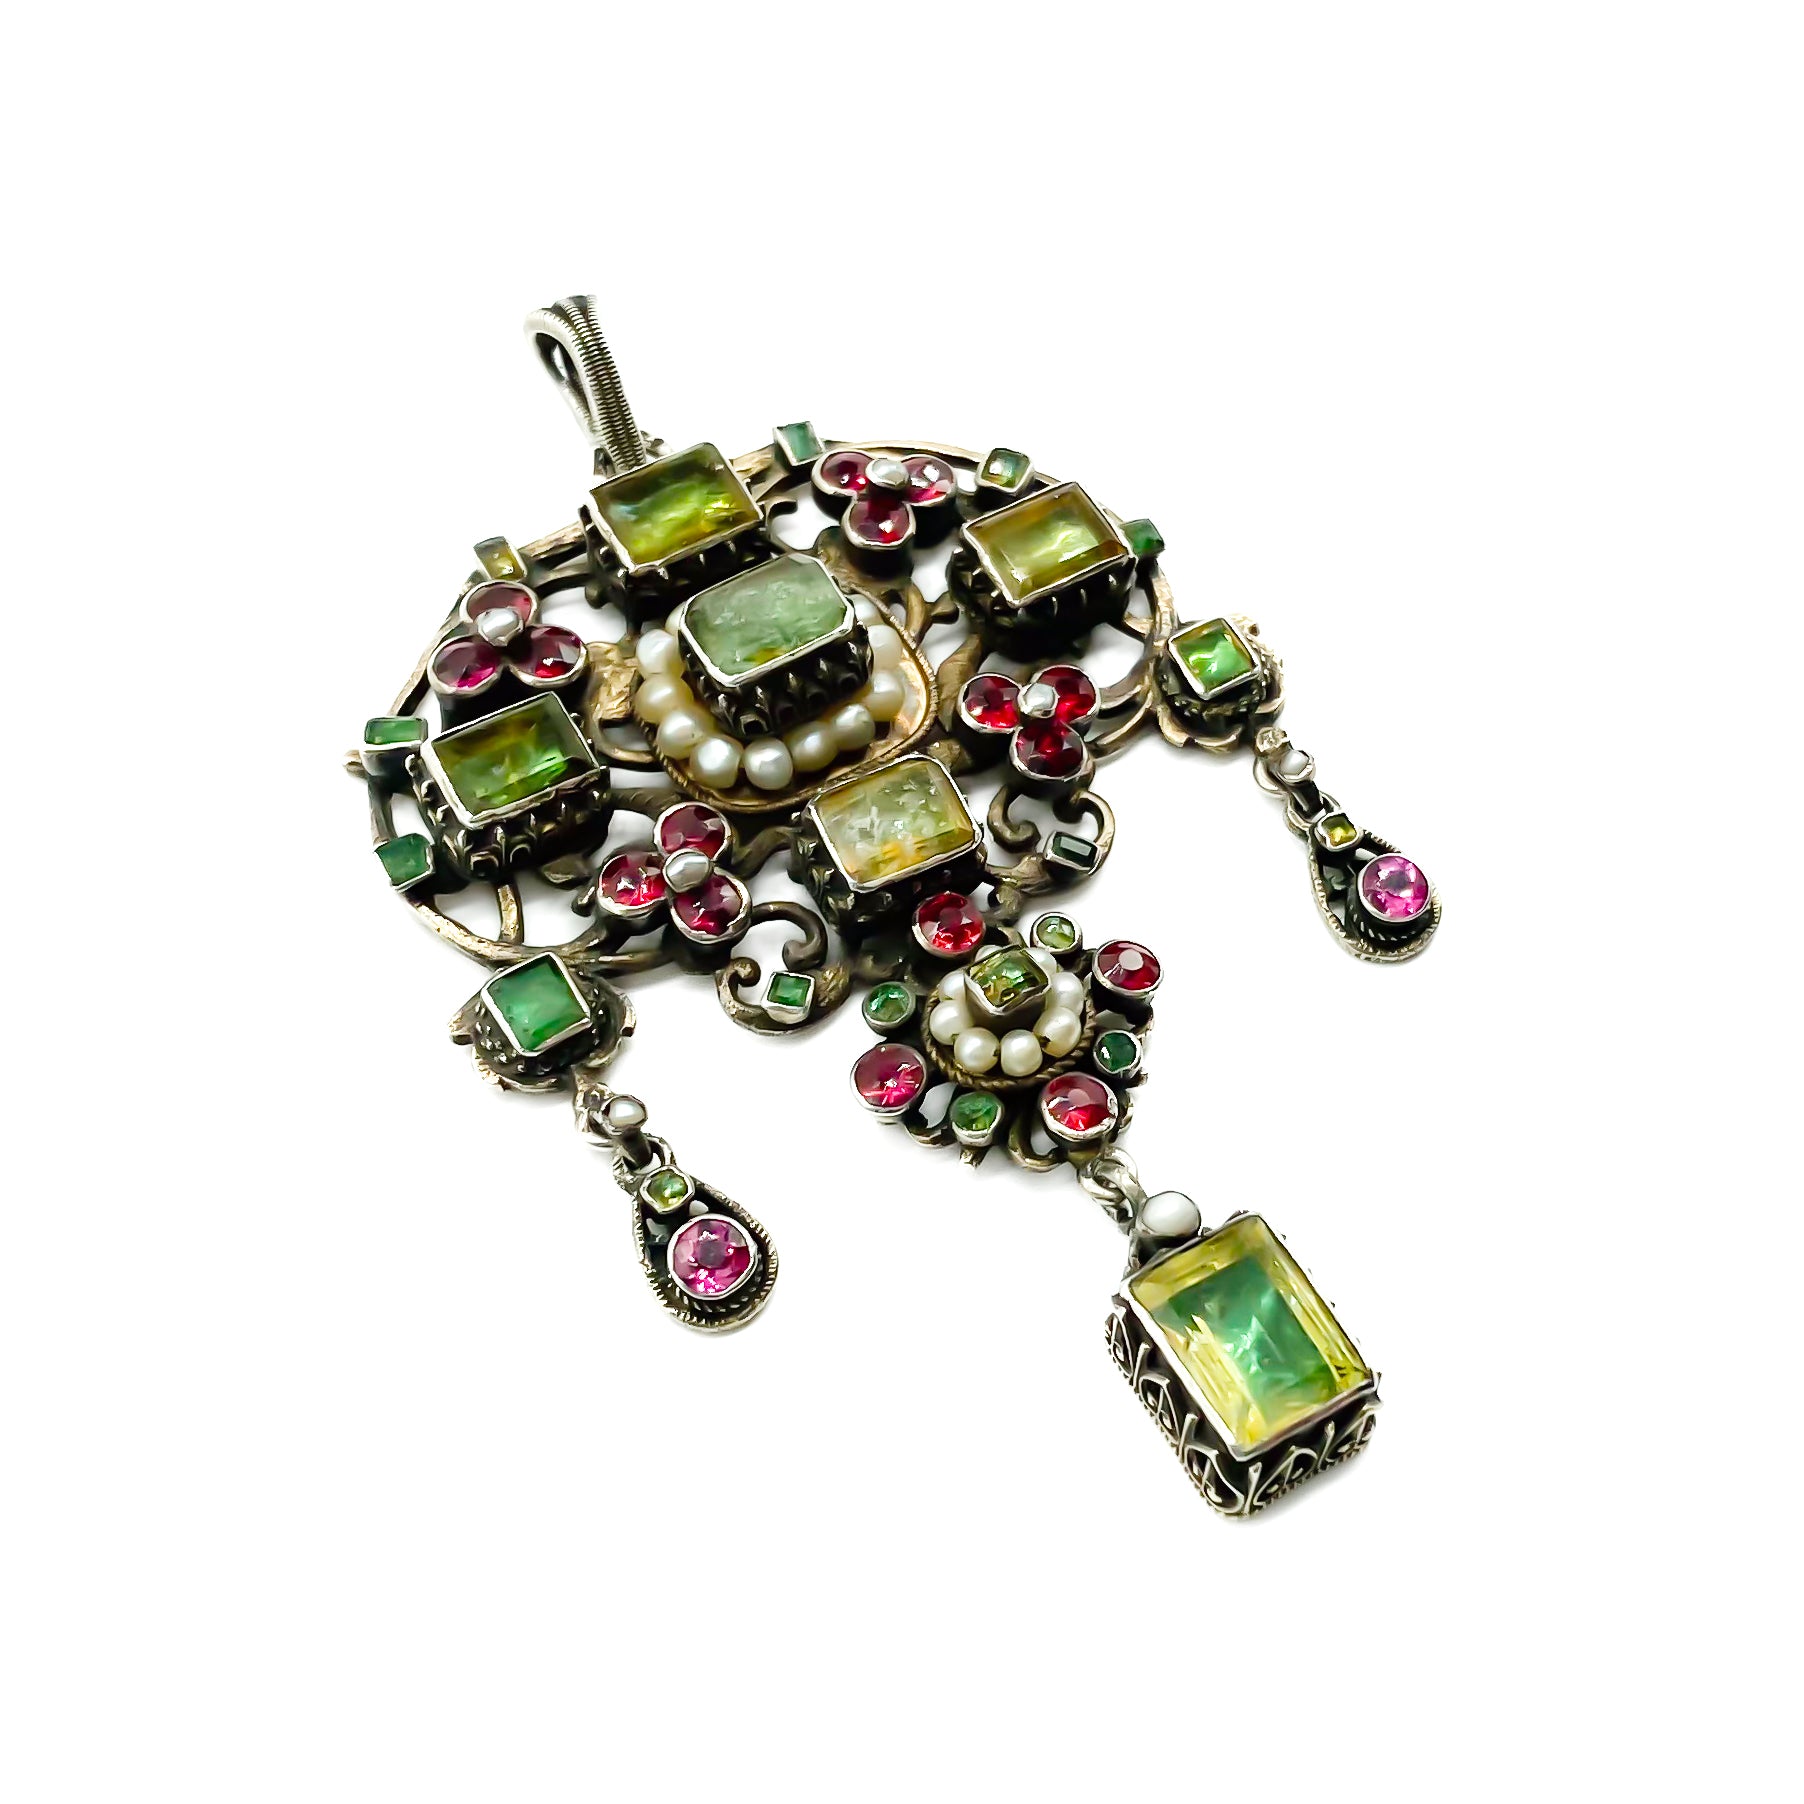 Very ornate silver gilt Austro-Hungarian Festoon pendant set with garnets, seed pearls, emeralds and other green stones. Pendant has beautiful engraving and floral detail.  Circa 1890